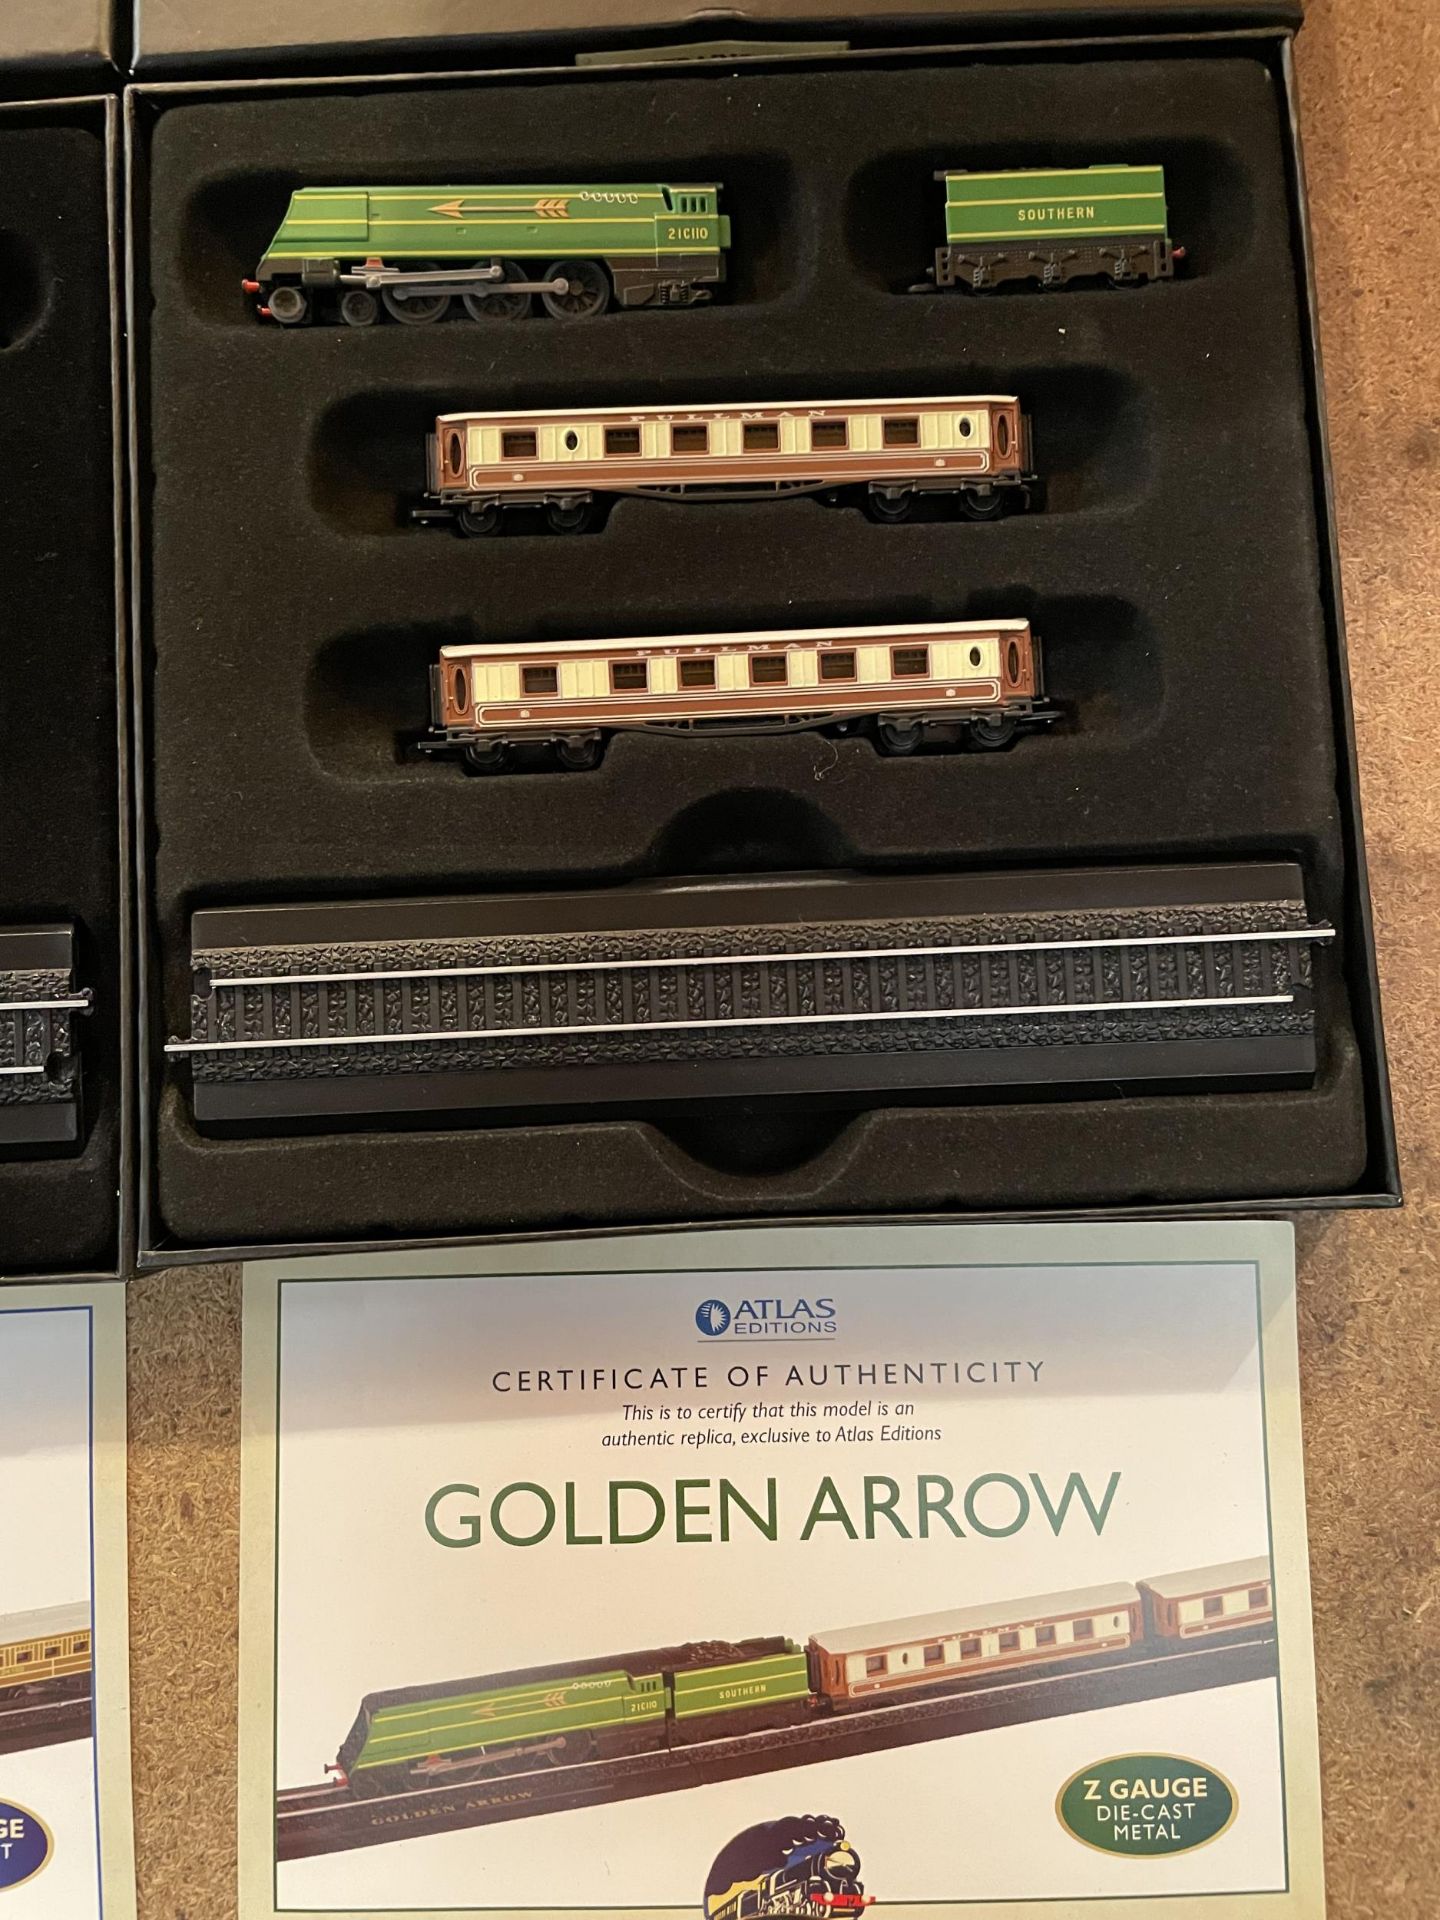 TWO MINI TRAINS SCALE 1/220 TO INCLUDE GOLDEN ARROW AND THE MALLARD - Image 3 of 3